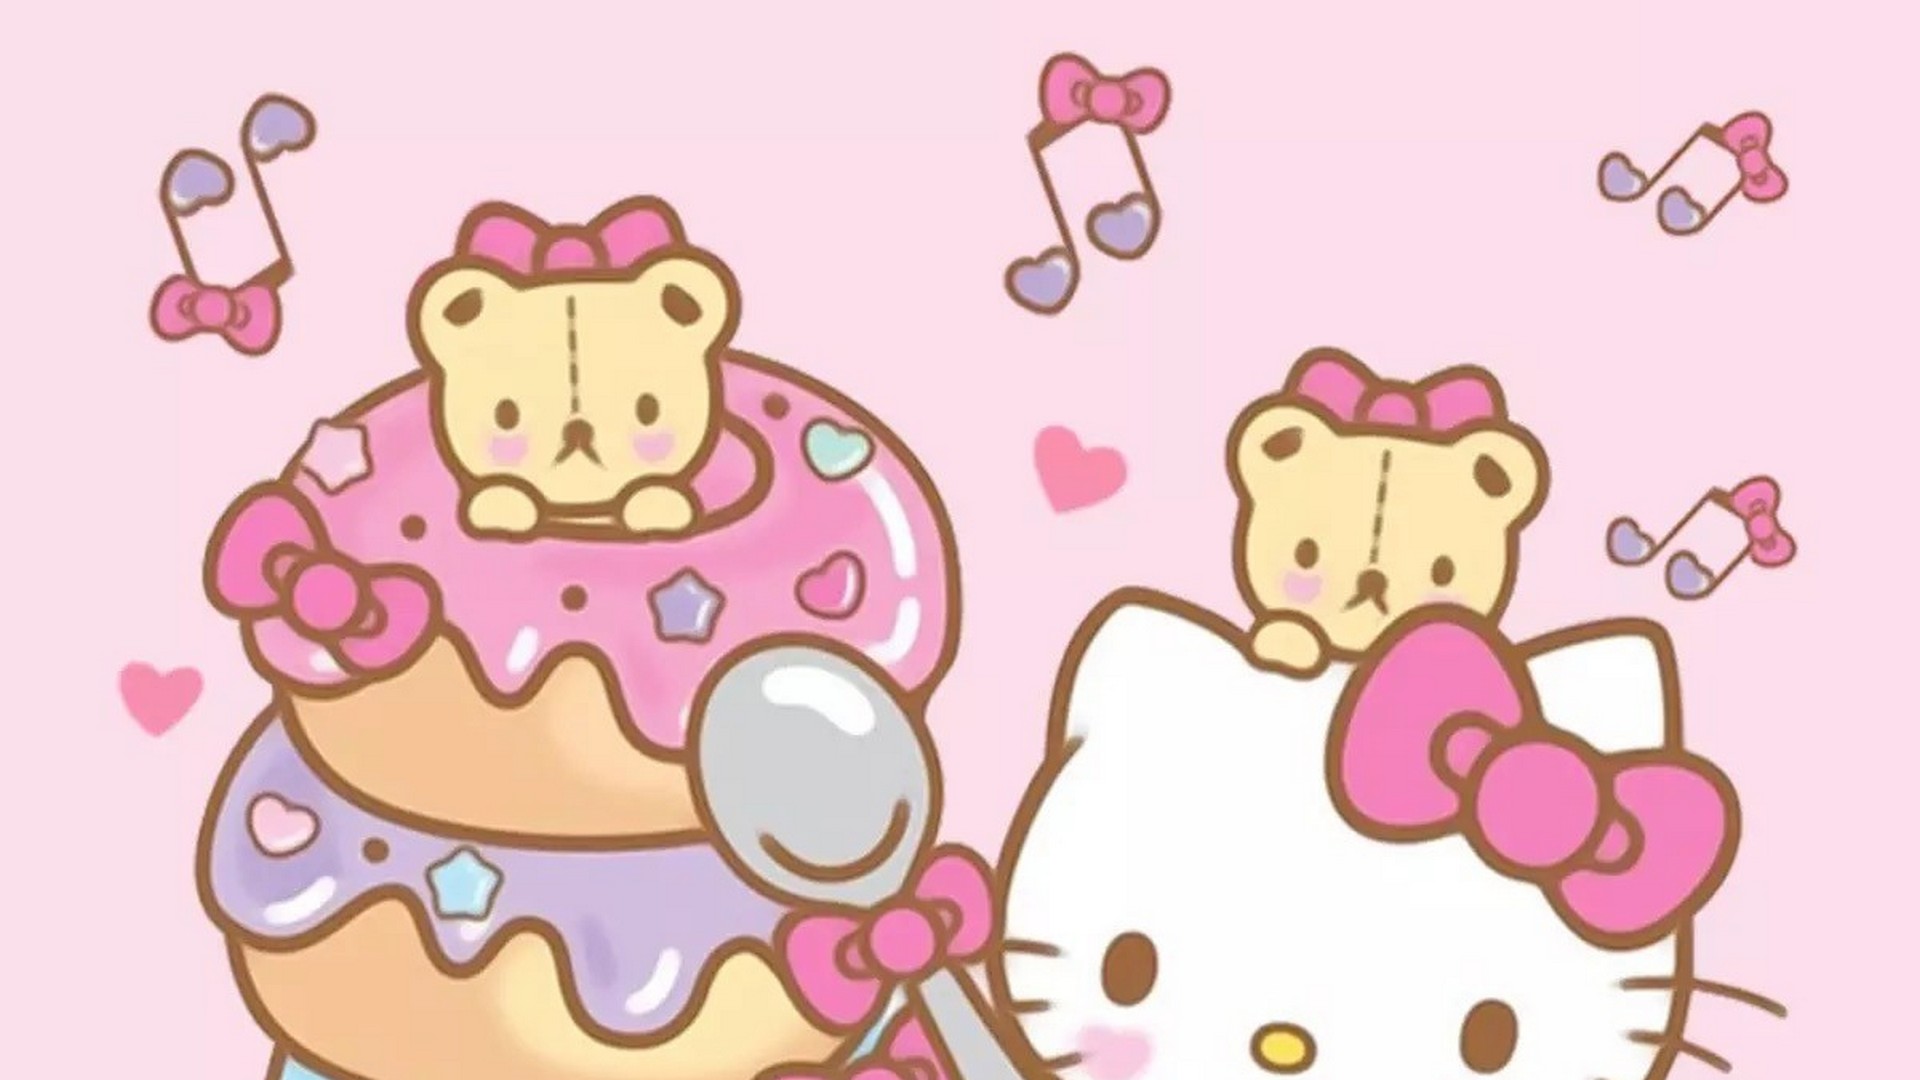 Wallpaper Hello Kitty Pictures HD with image resolution 1920x1080 pixel. You can make this wallpaper for your Desktop Computer Backgrounds, Mac Wallpapers, Android Lock screen or iPhone Screensavers